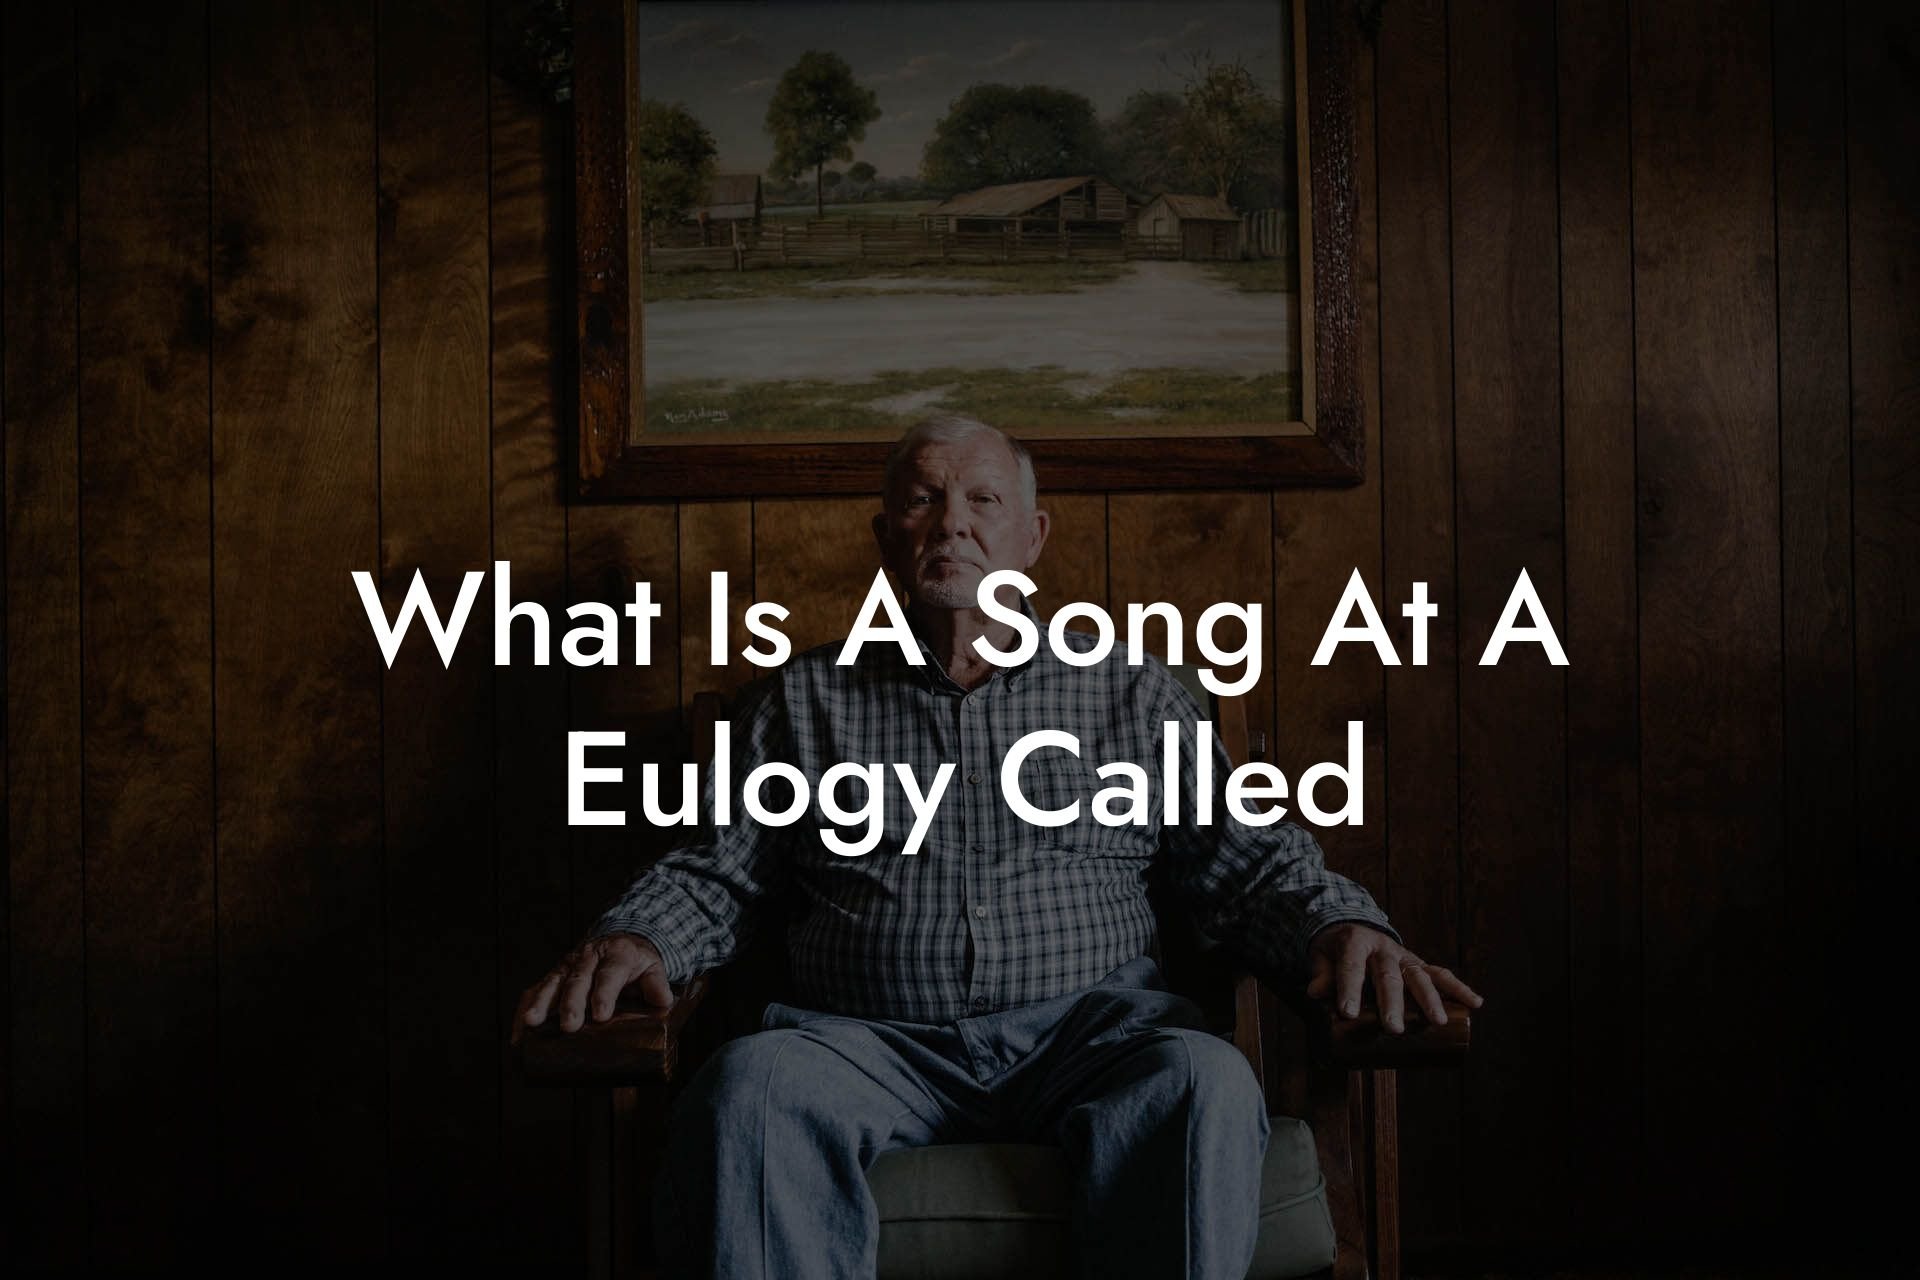 What Is A Song At A Eulogy Called